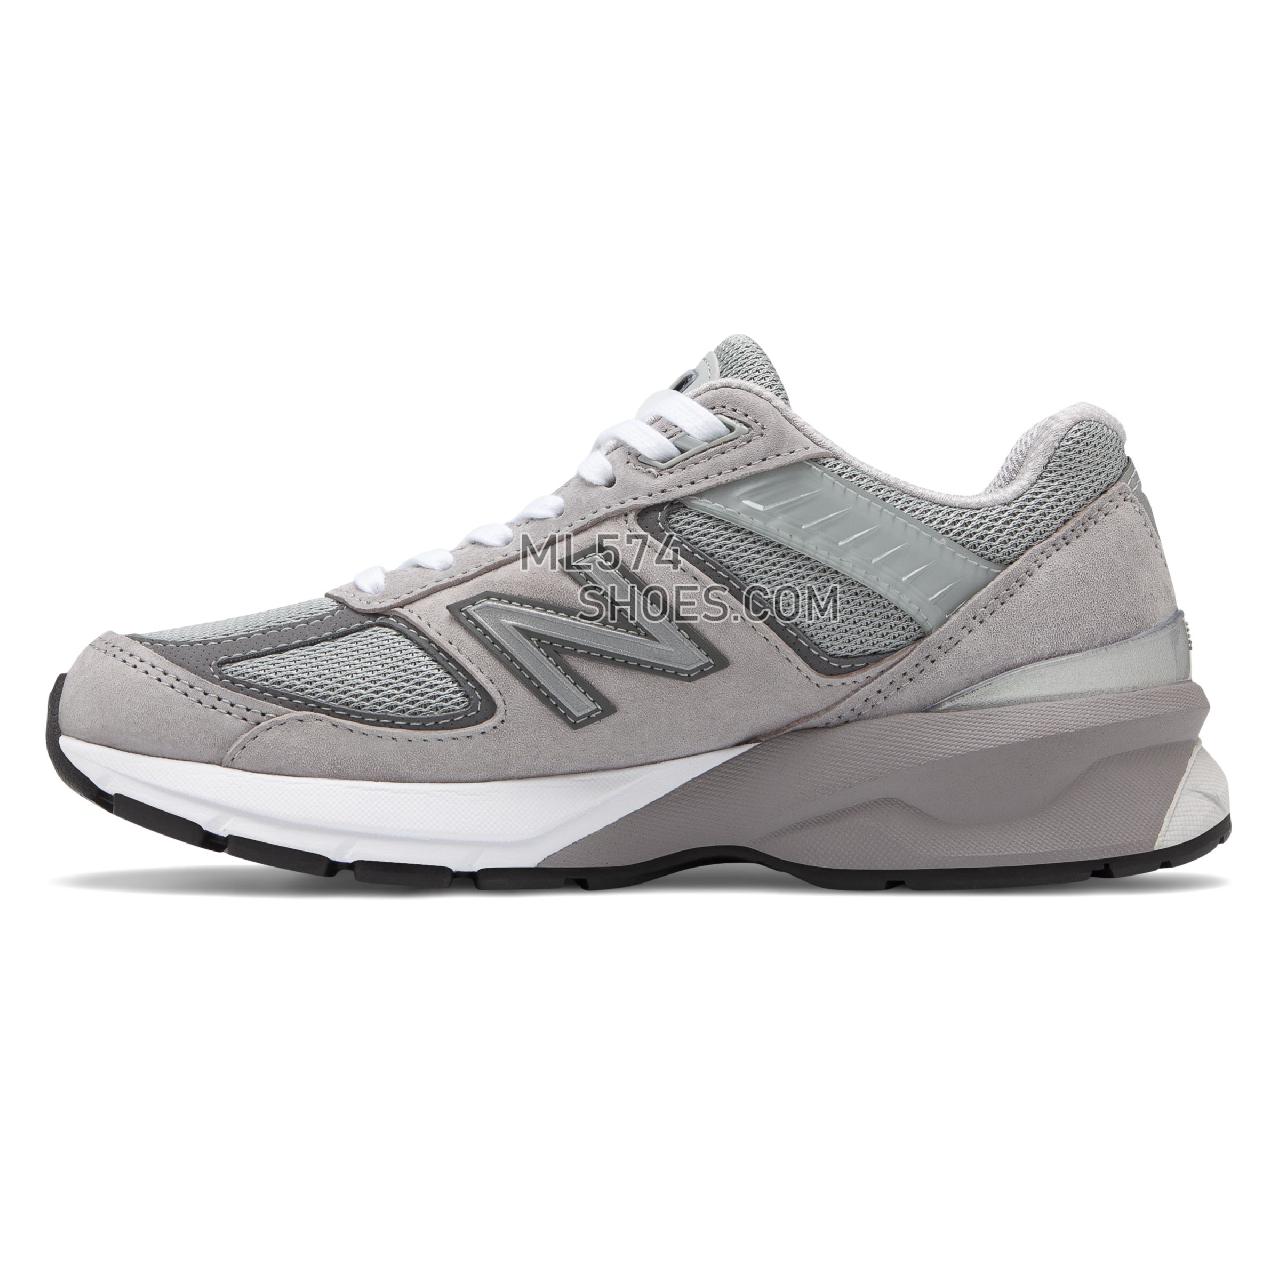 New Balance 990v5 Made in US - Women's Neutral Running - Grey with Castlerock - W990GL5